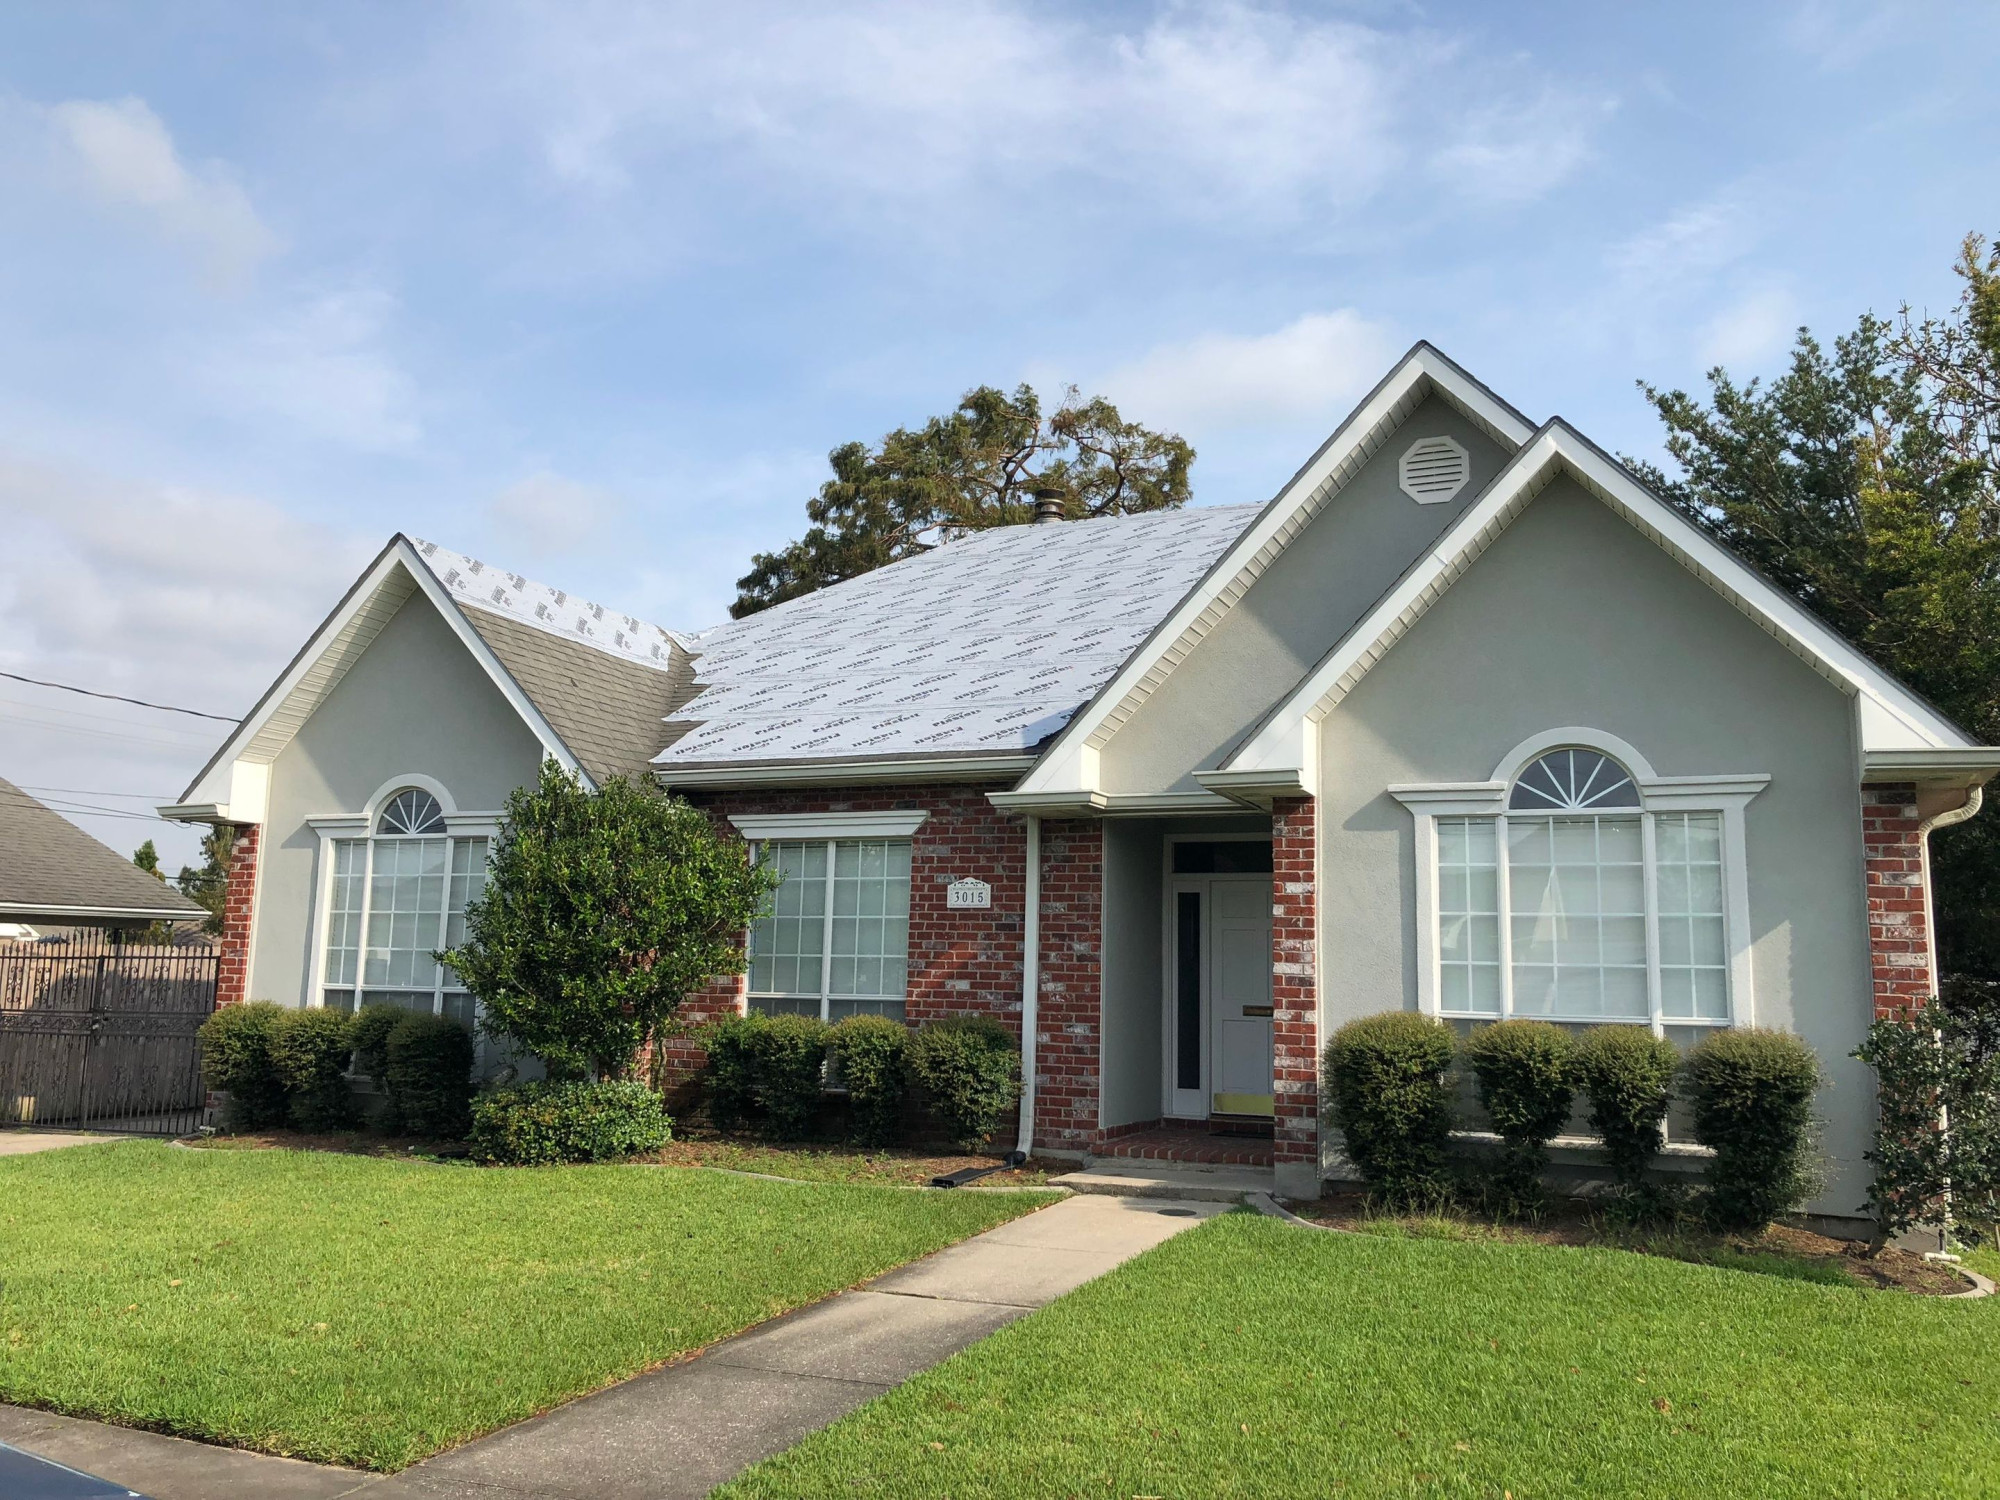 Roofing Services in Metairie, LA